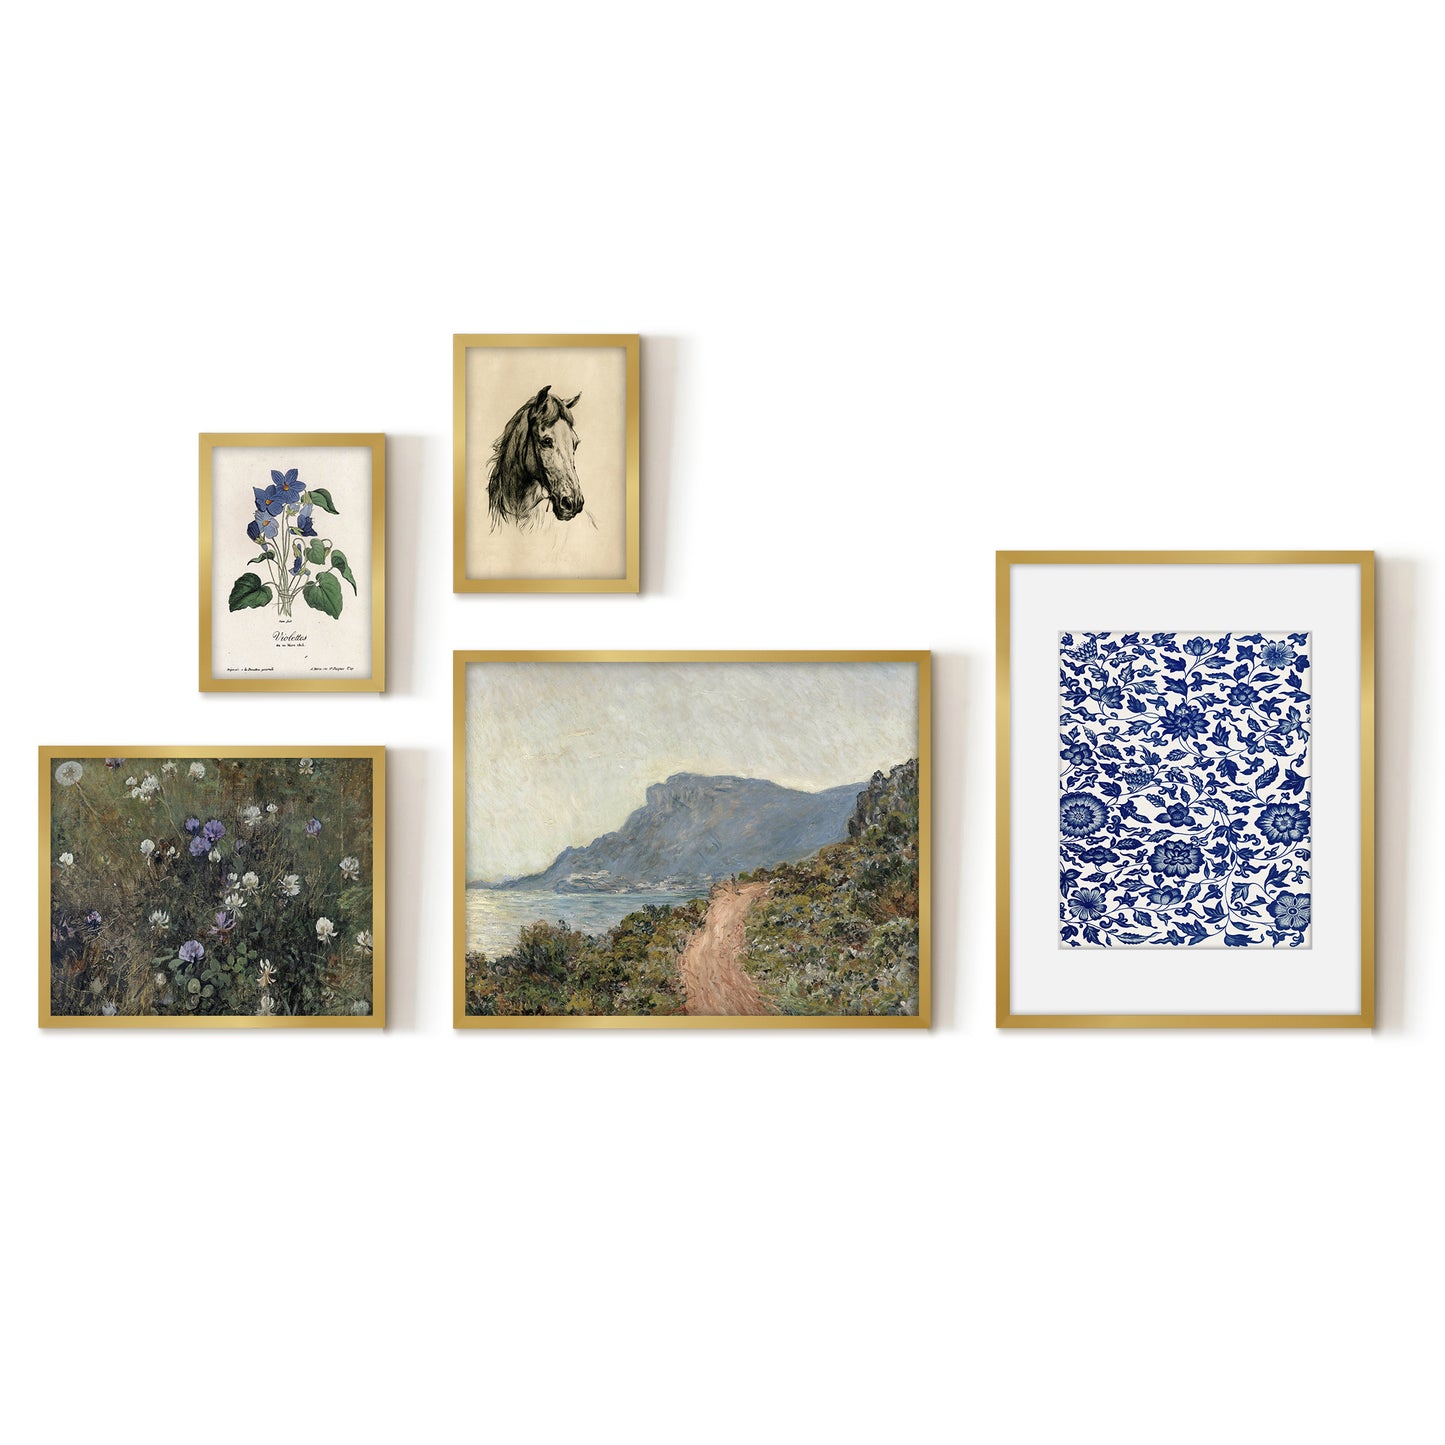 5 Piece Vintage Gallery Wall Art Set - Enchanted Trails Art by Wall + Wonder